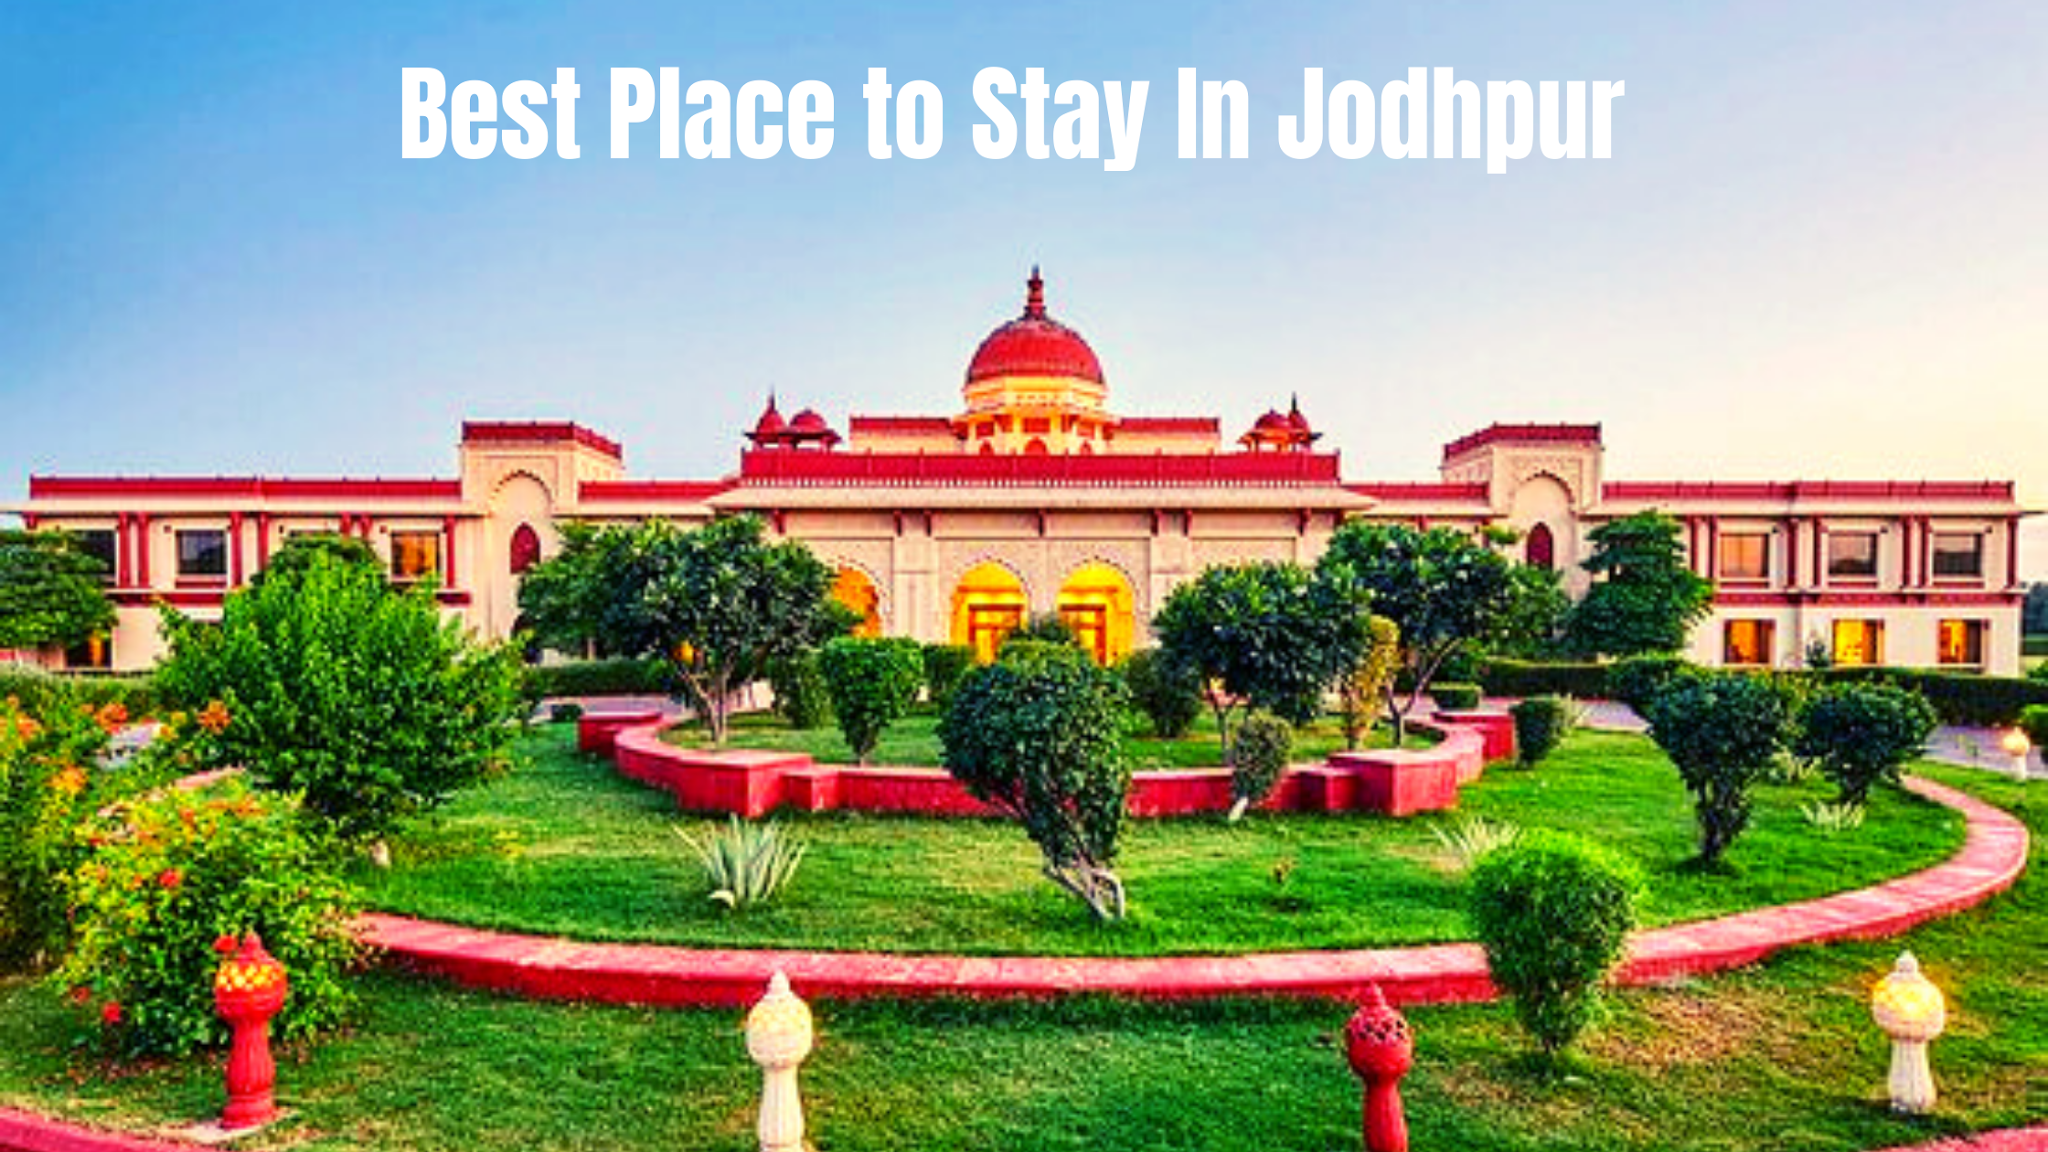 Best Place to Stay In Jodhpur